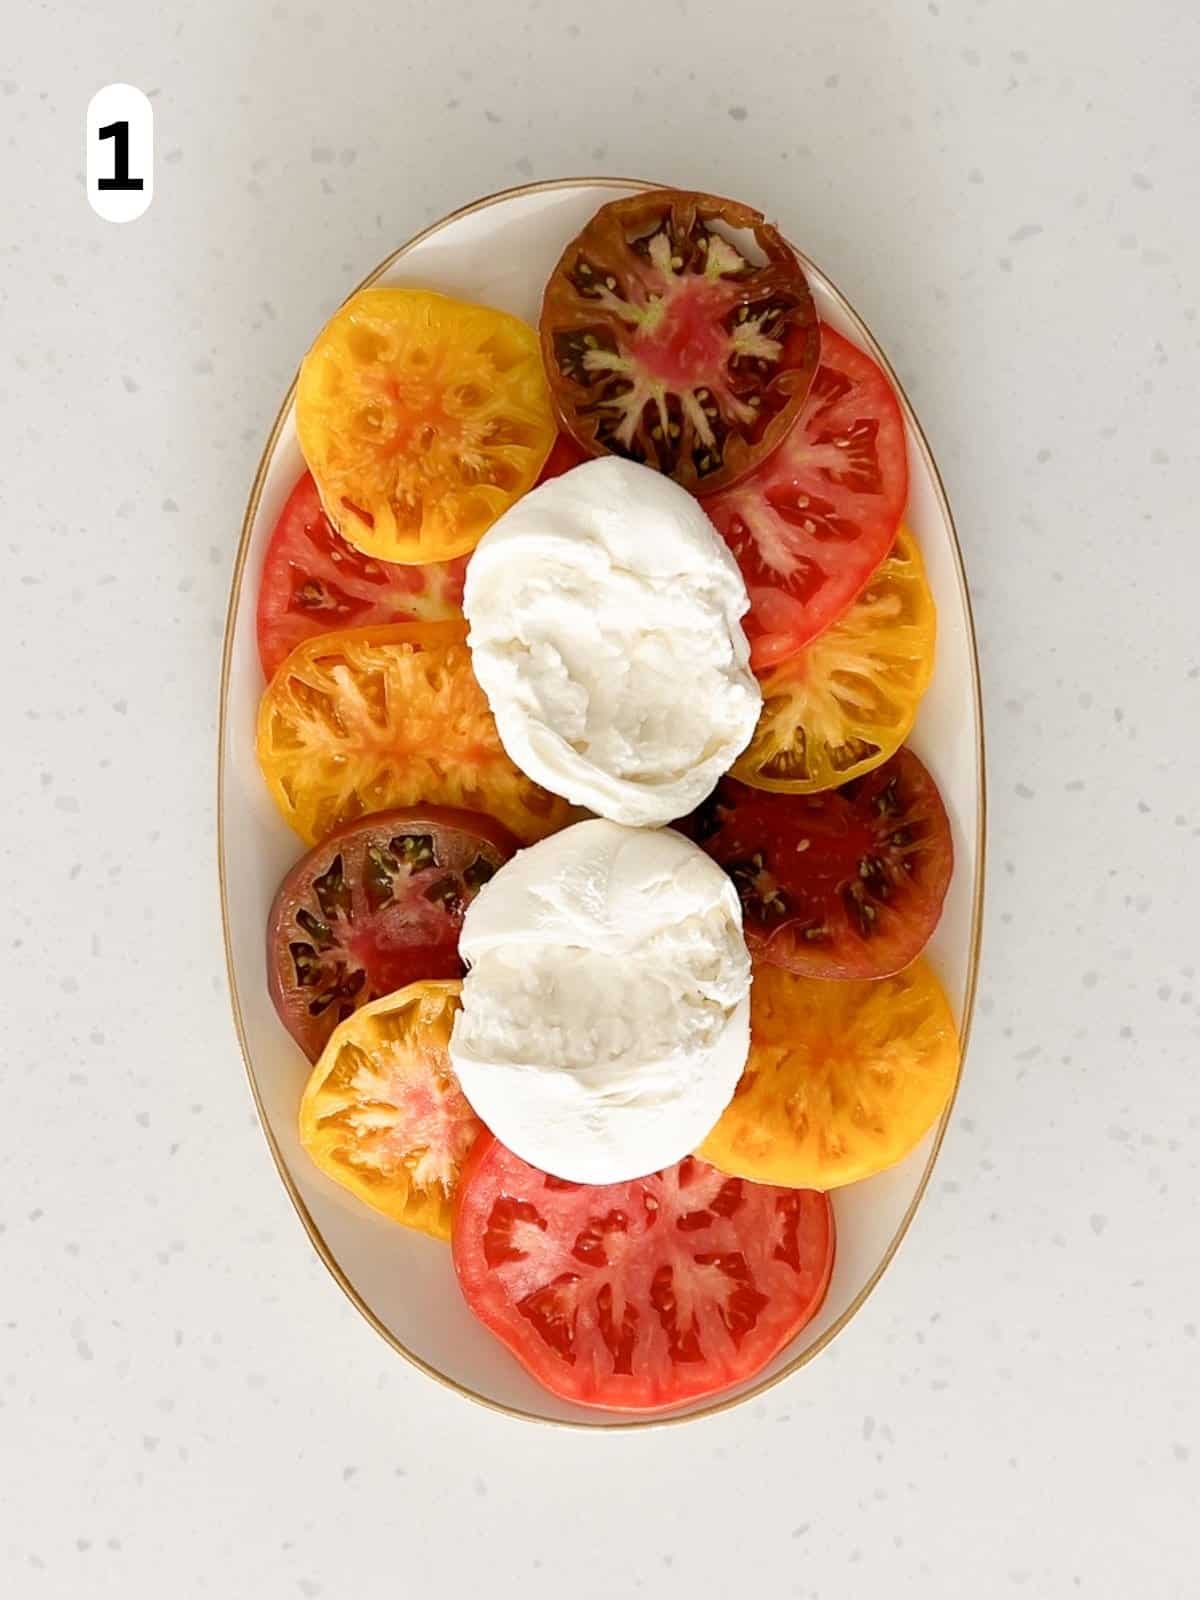 The tomato slices are arranged on a platter with two balls of burrata in the center.